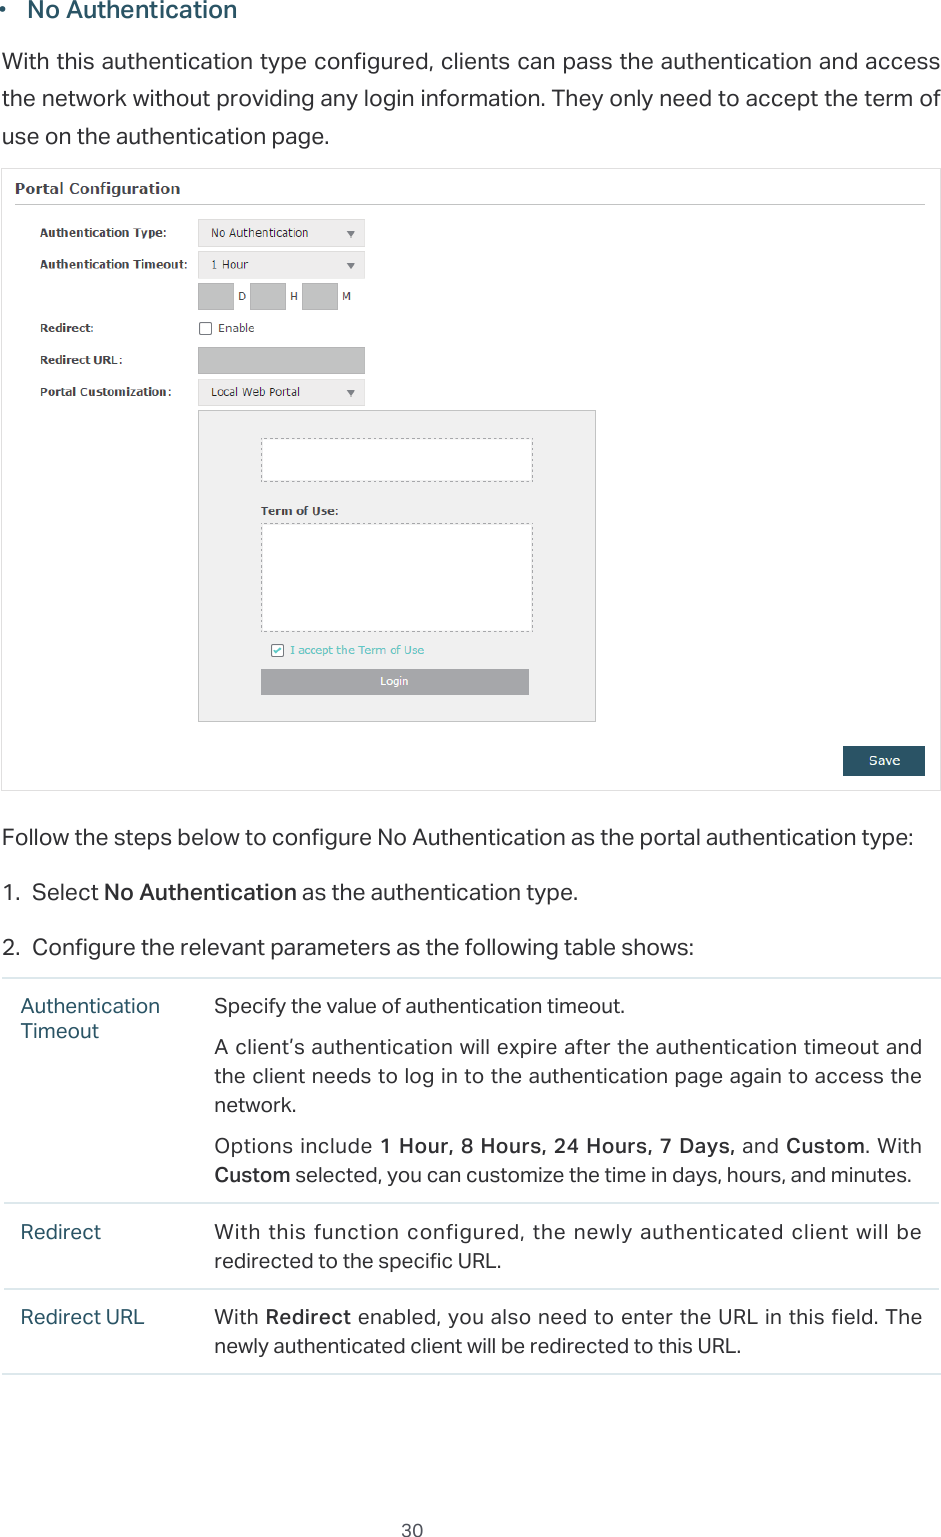  30 ·No AuthenticationWith this authentication type configured, clients can pass the authentication and access the network without providing any login information. They only need to accept the term of use on the authentication page.Follow the steps below to configure No Authentication as the portal authentication type:1. Select No Authentication as the authentication type.2. Configure the relevant parameters as the following table shows:Authentication TimeoutSpecify the value of authentication timeout.A client’s authentication will expire after the authentication timeout and the client needs to log in to the authentication page again to access the network.Options include 1 Hour, 8 Hours, 24 Hours, 7 Days, and Custom. With Custom selected, you can customize the time in days, hours, and minutes.Redirect With this function configured, the newly authenticated client will be redirected to the specific URL.Redirect URL With Redirect enabled, you also need to enter the URL in this field. The newly authenticated client will be redirected to this URL.